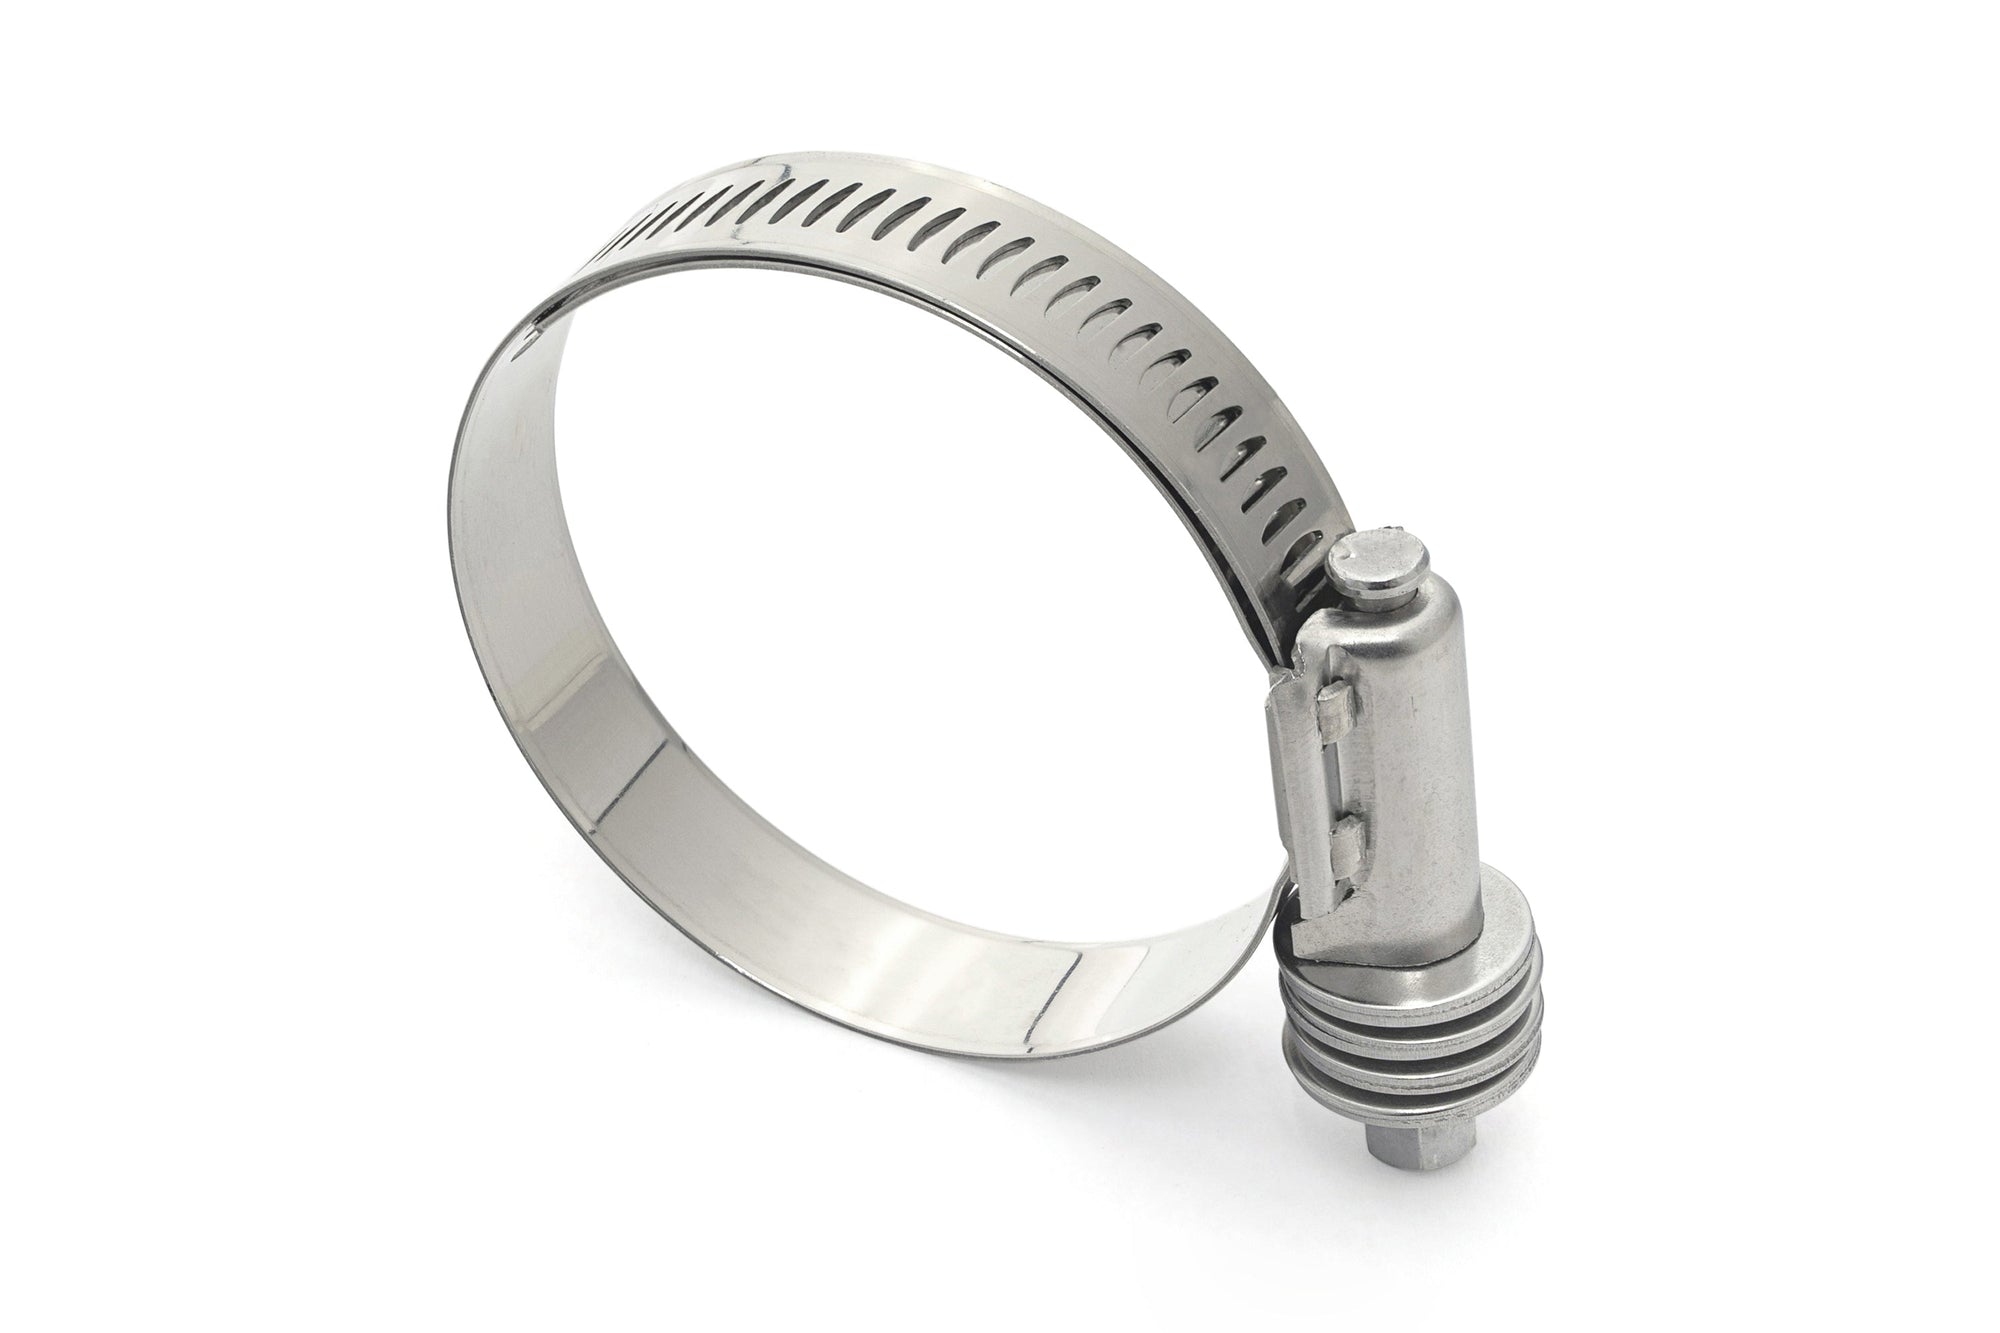 HPS Stainless Steel Heavy Duty Constant Torque Hose Clamp Size # 712 CTHD-712 6.25 - 7.12 inch 159mm - 181mm